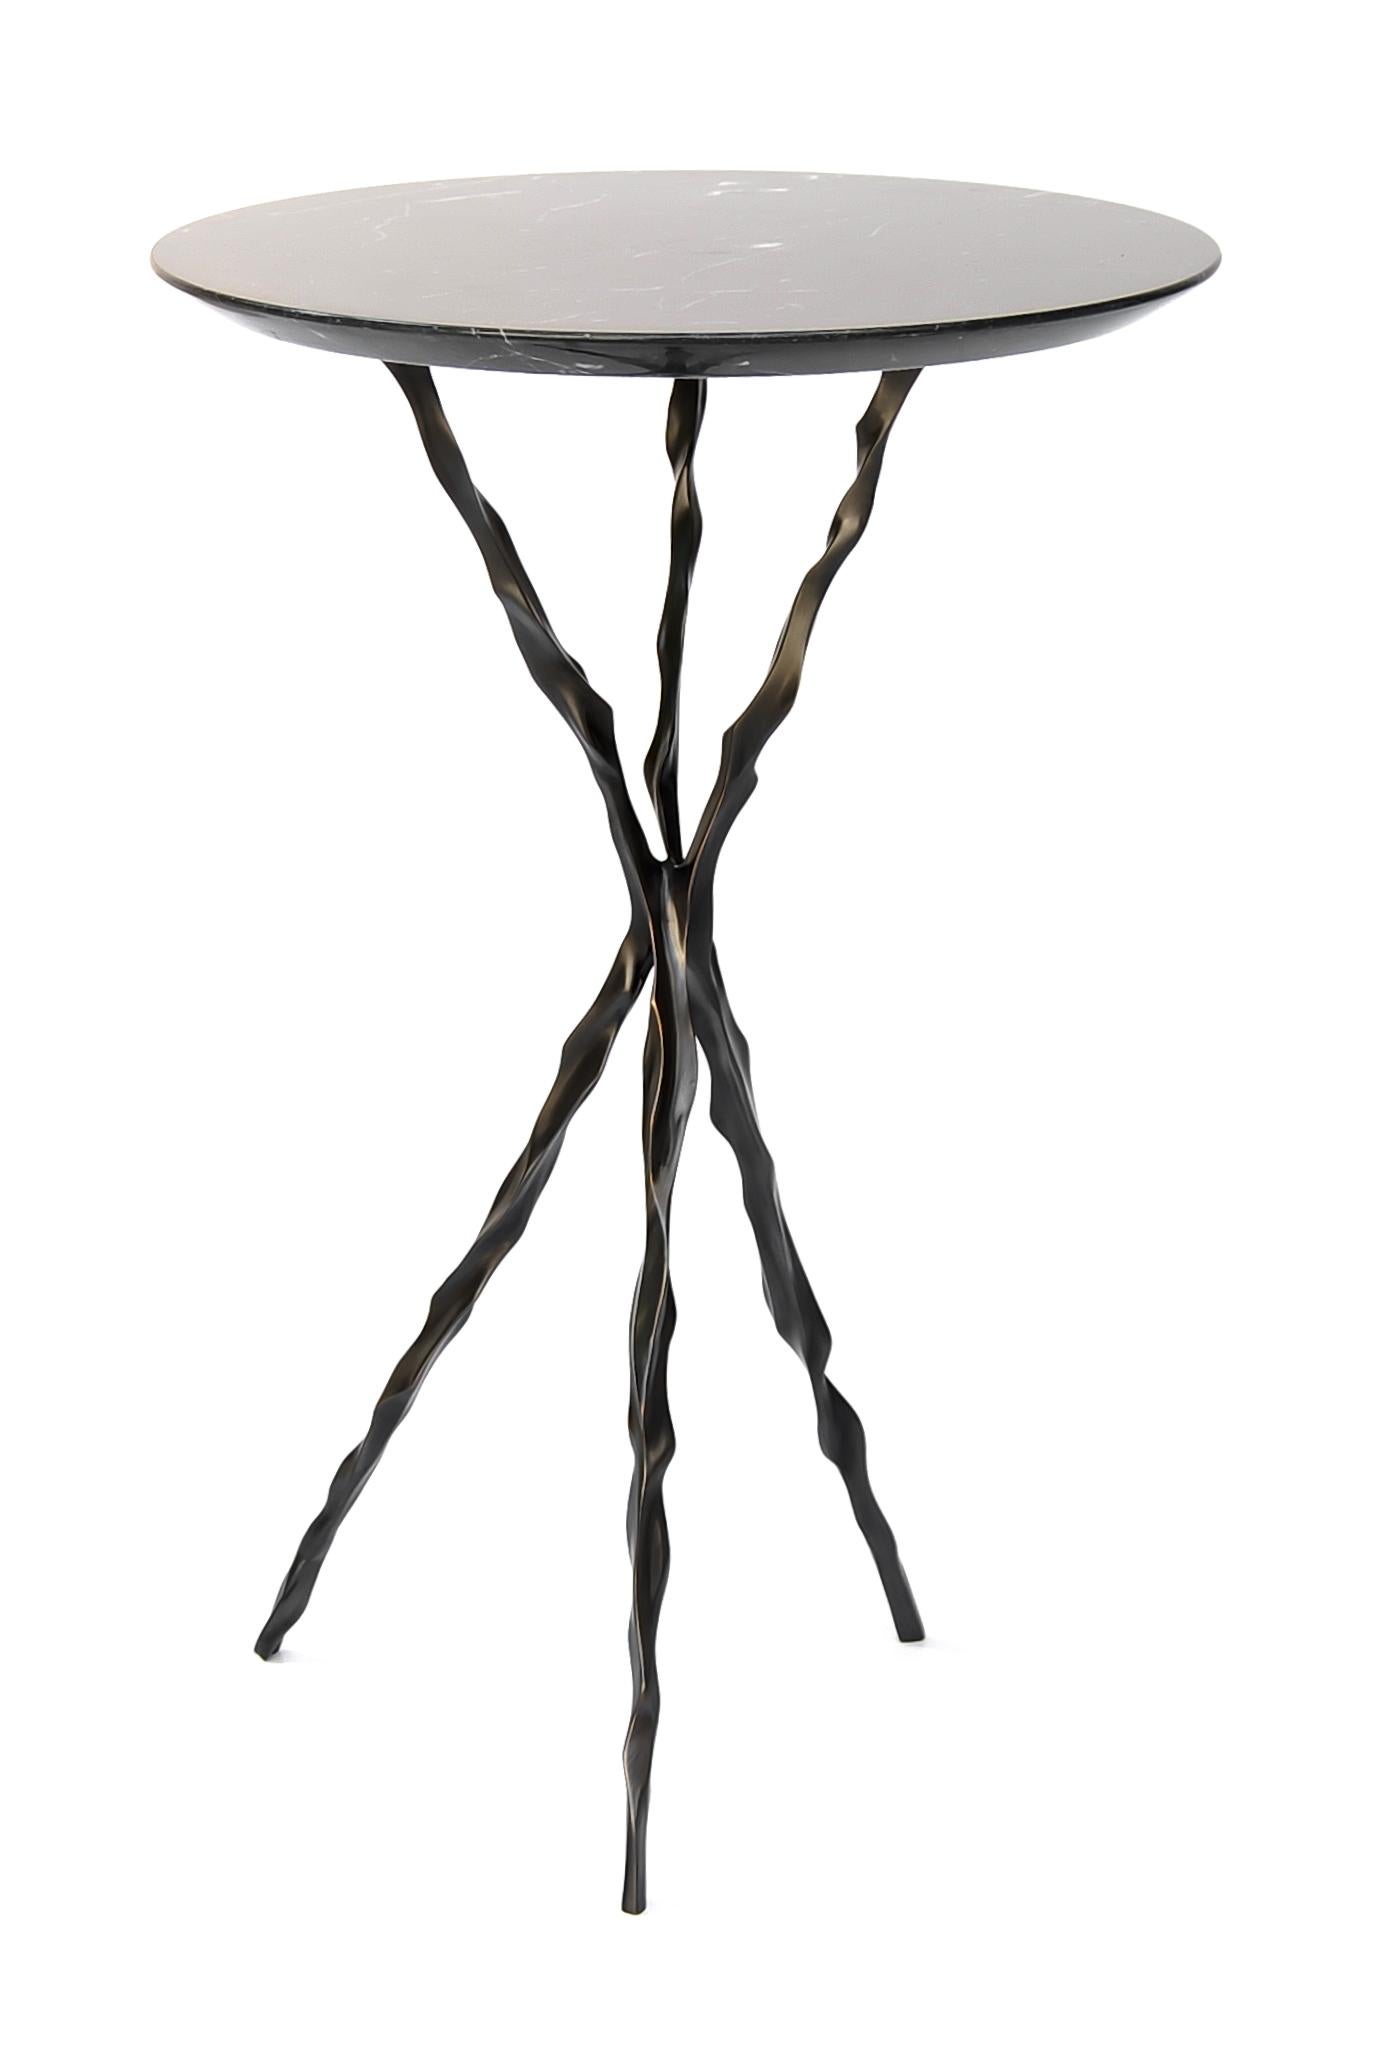 Brazilian Thom Drink Table with Nero Marquina Marble Top by Fakasaka Design For Sale